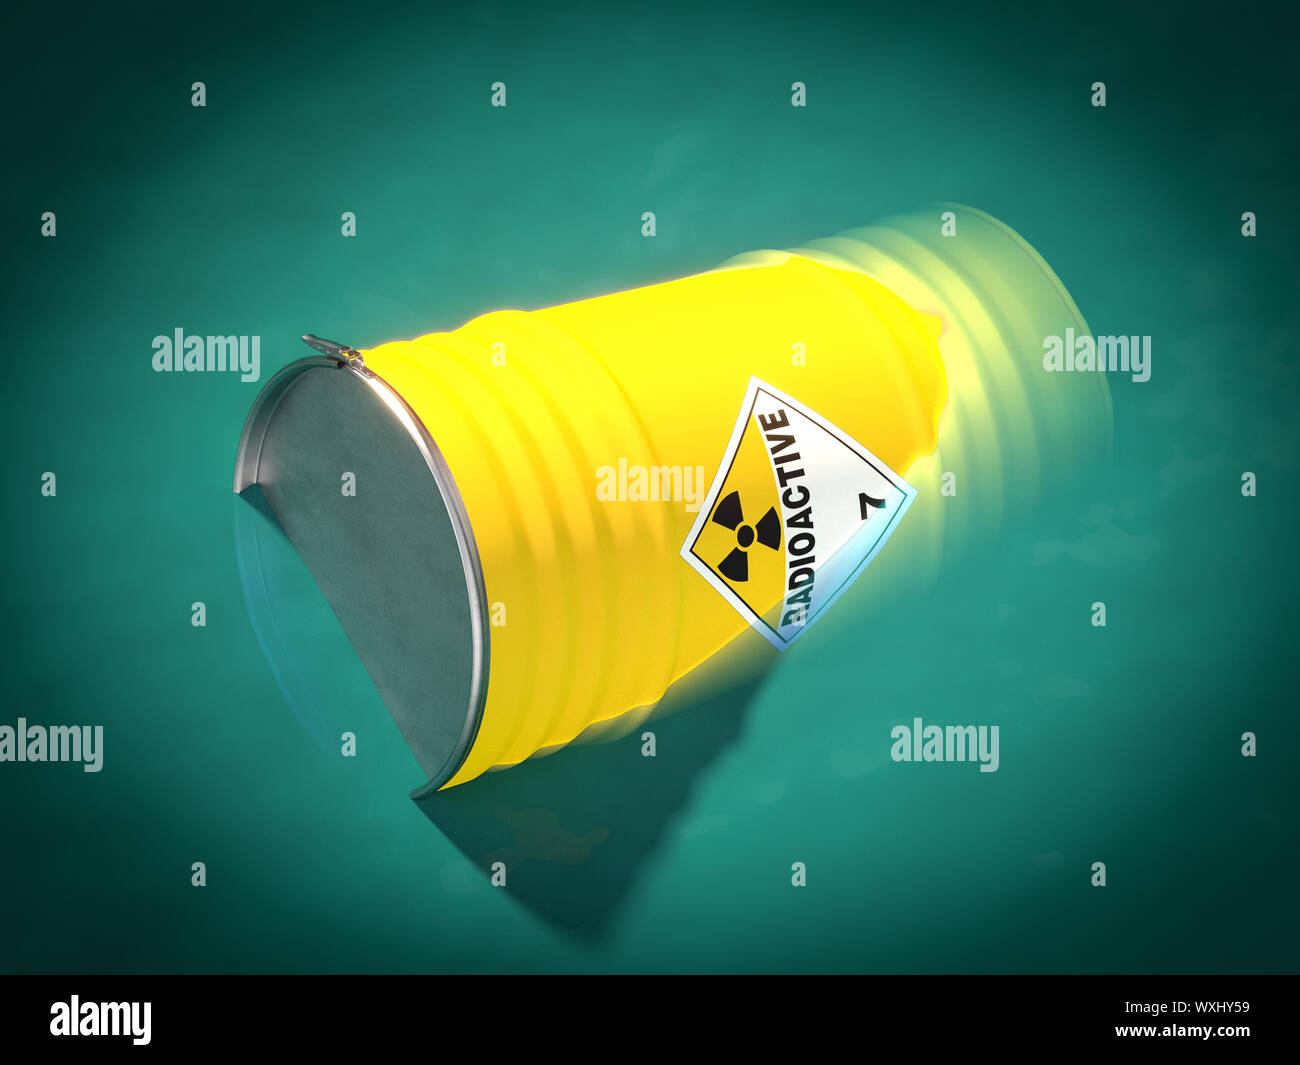 barrel containing radioactive waste floats in the middle of the sea. 3d image rendering. Concept of ecological disaster. Stock Photo